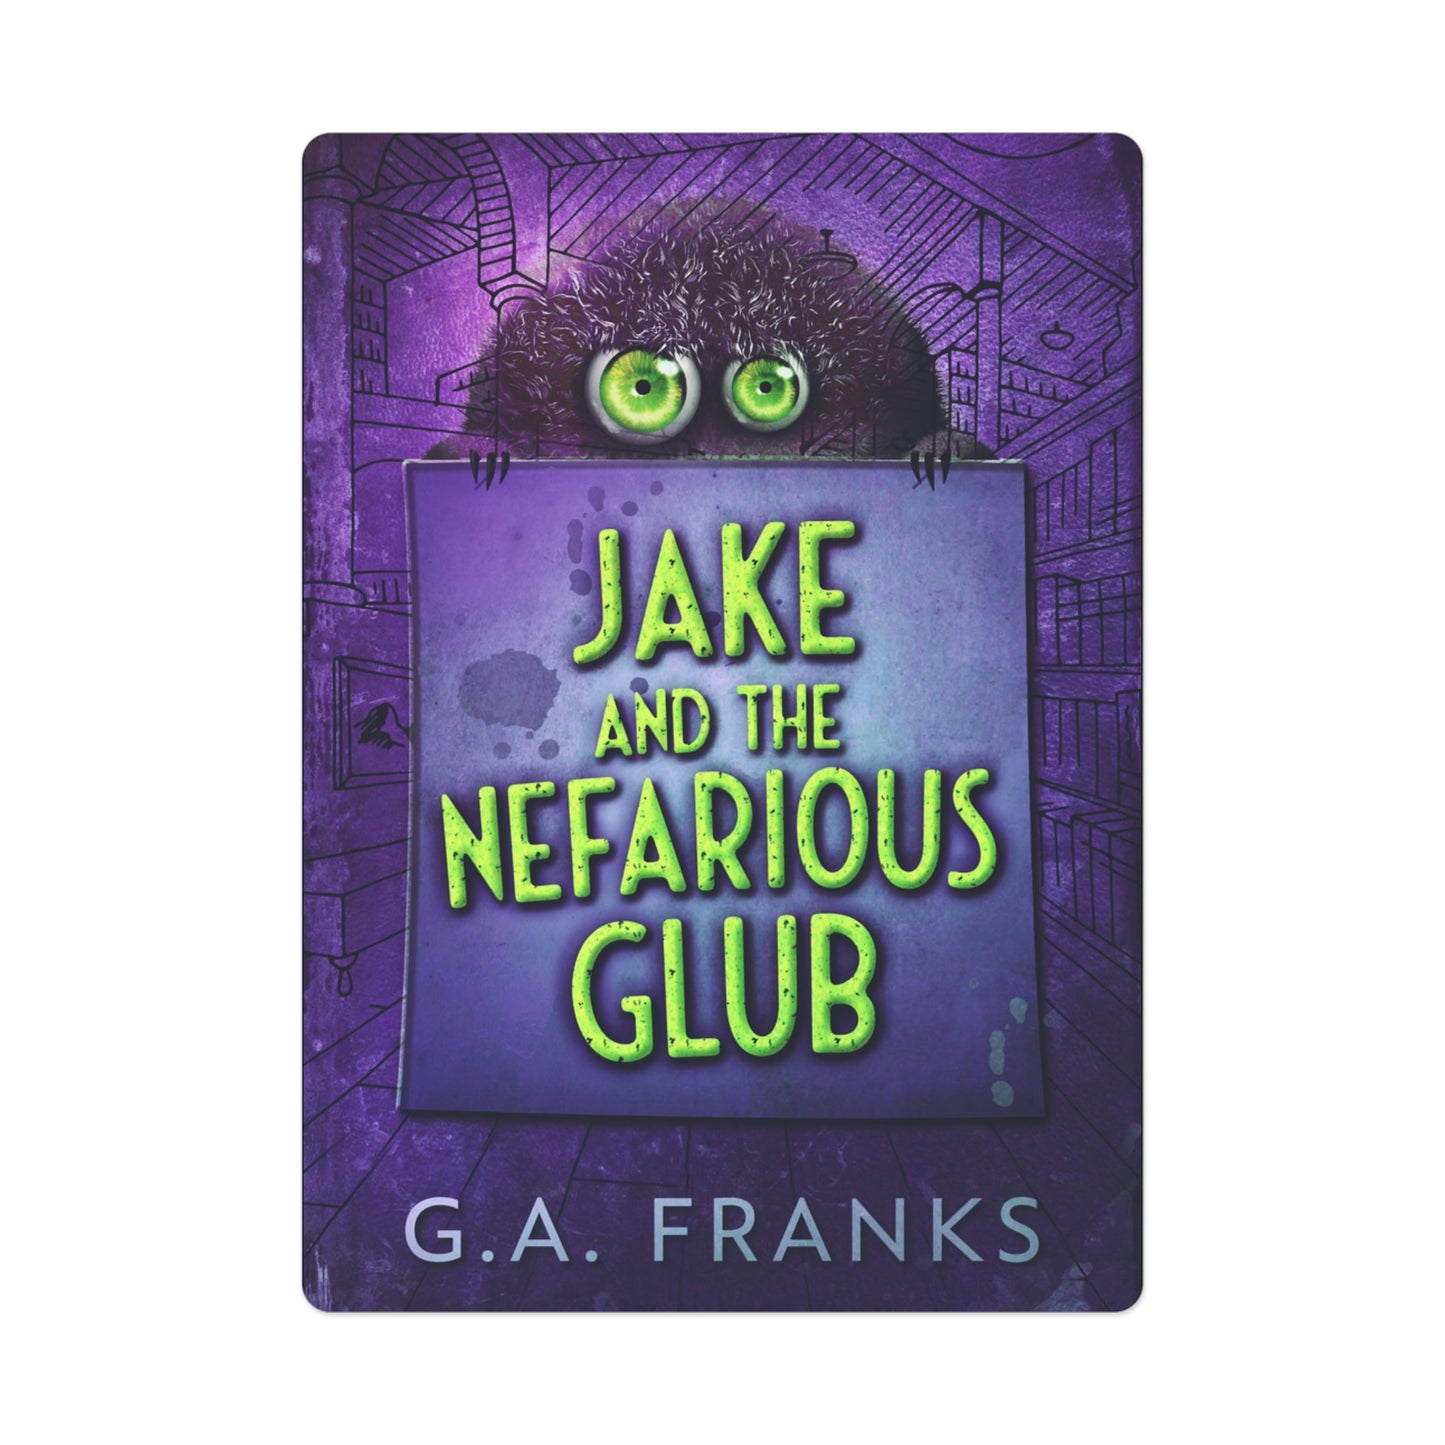 Jake and the Nefarious Glub - Playing Cards